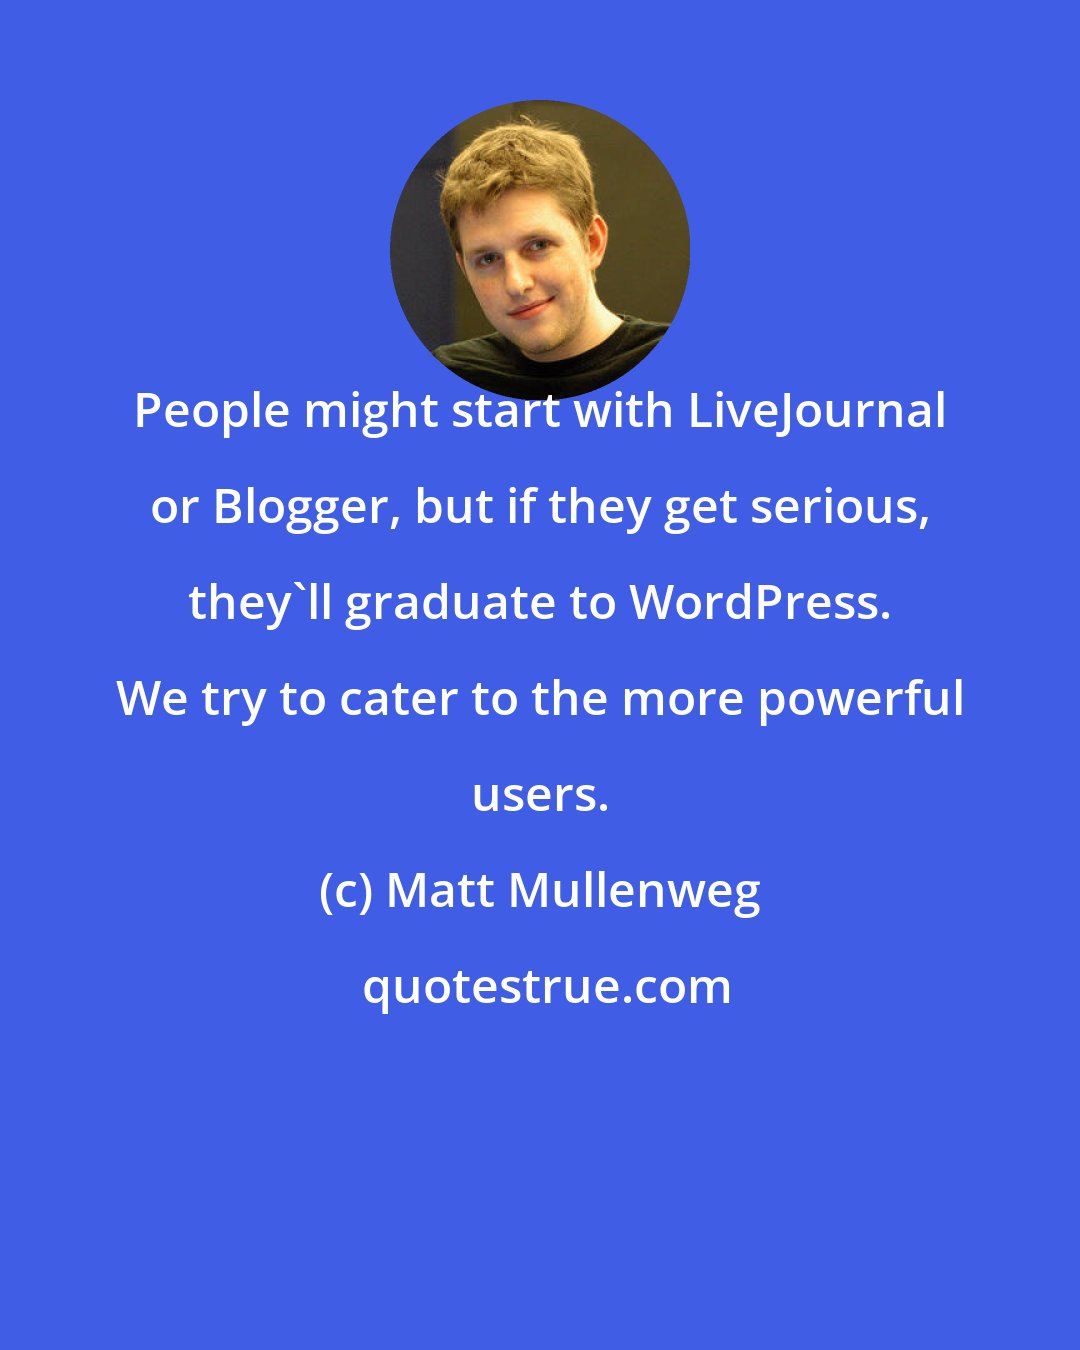 Matt Mullenweg: People might start with LiveJournal or Blogger, but if they get serious, they'll graduate to WordPress. We try to cater to the more powerful users.